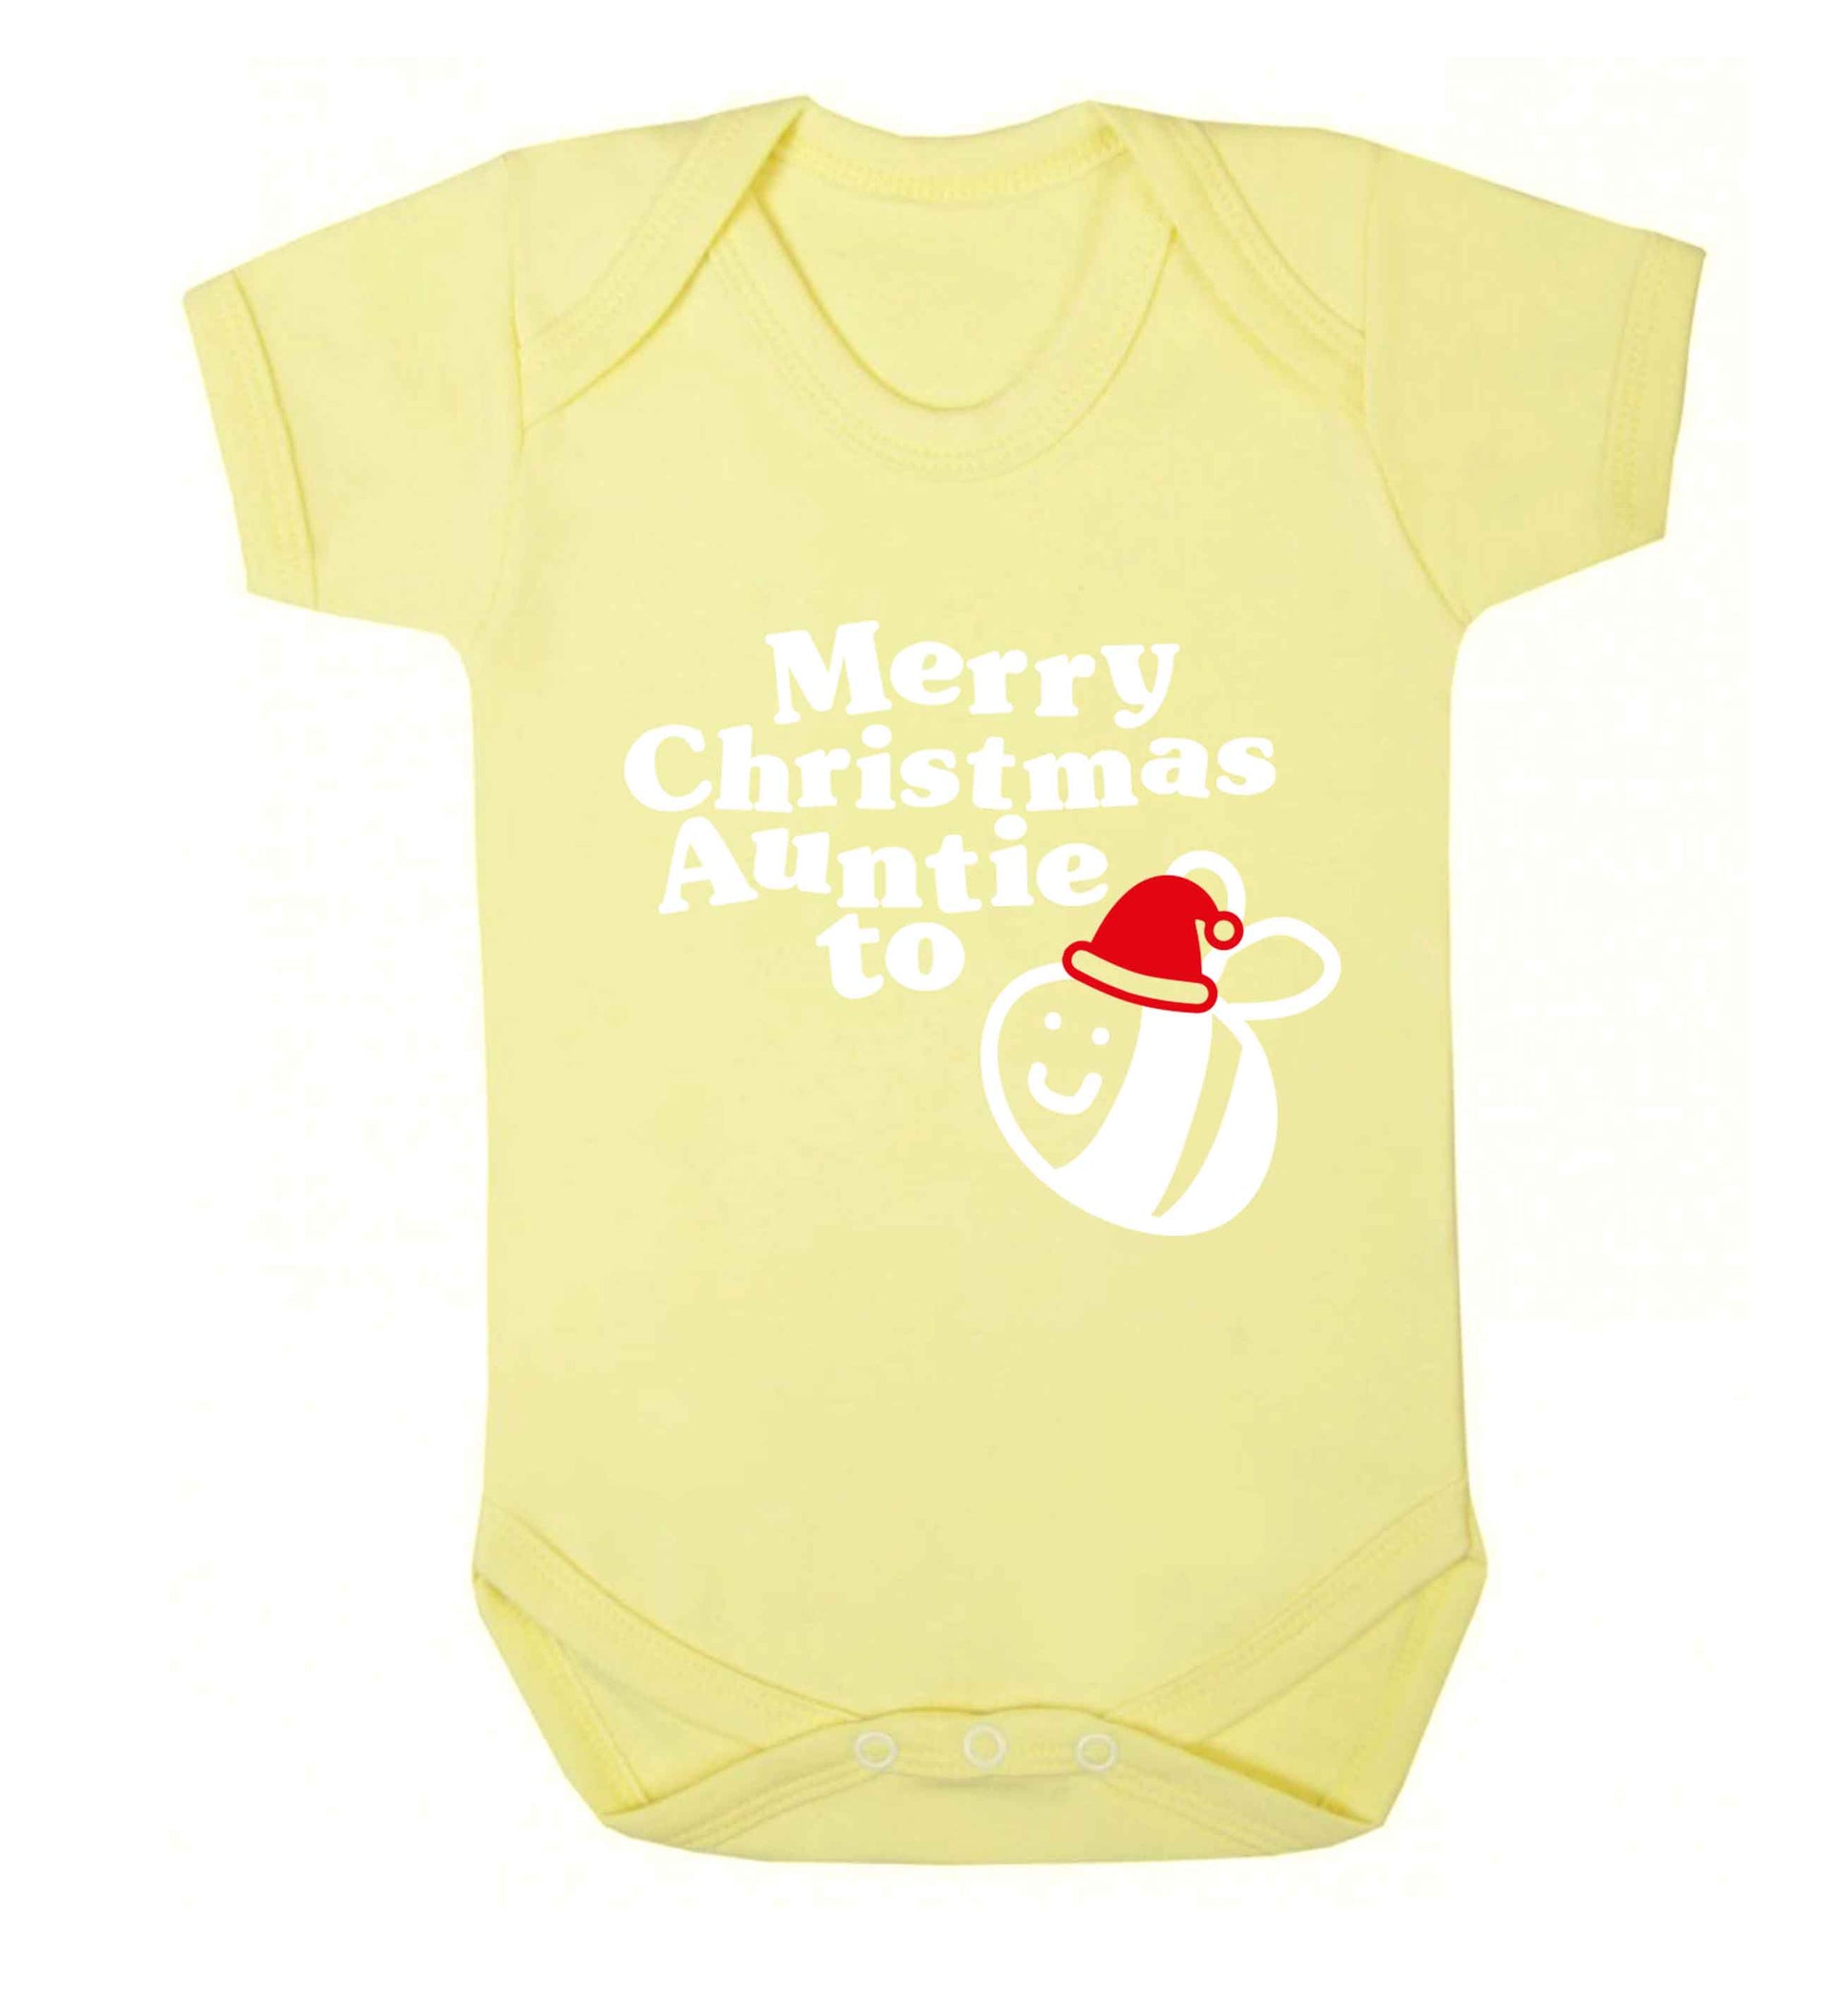 Merry Christmas auntie to be Baby Vest pale yellow 18-24 months